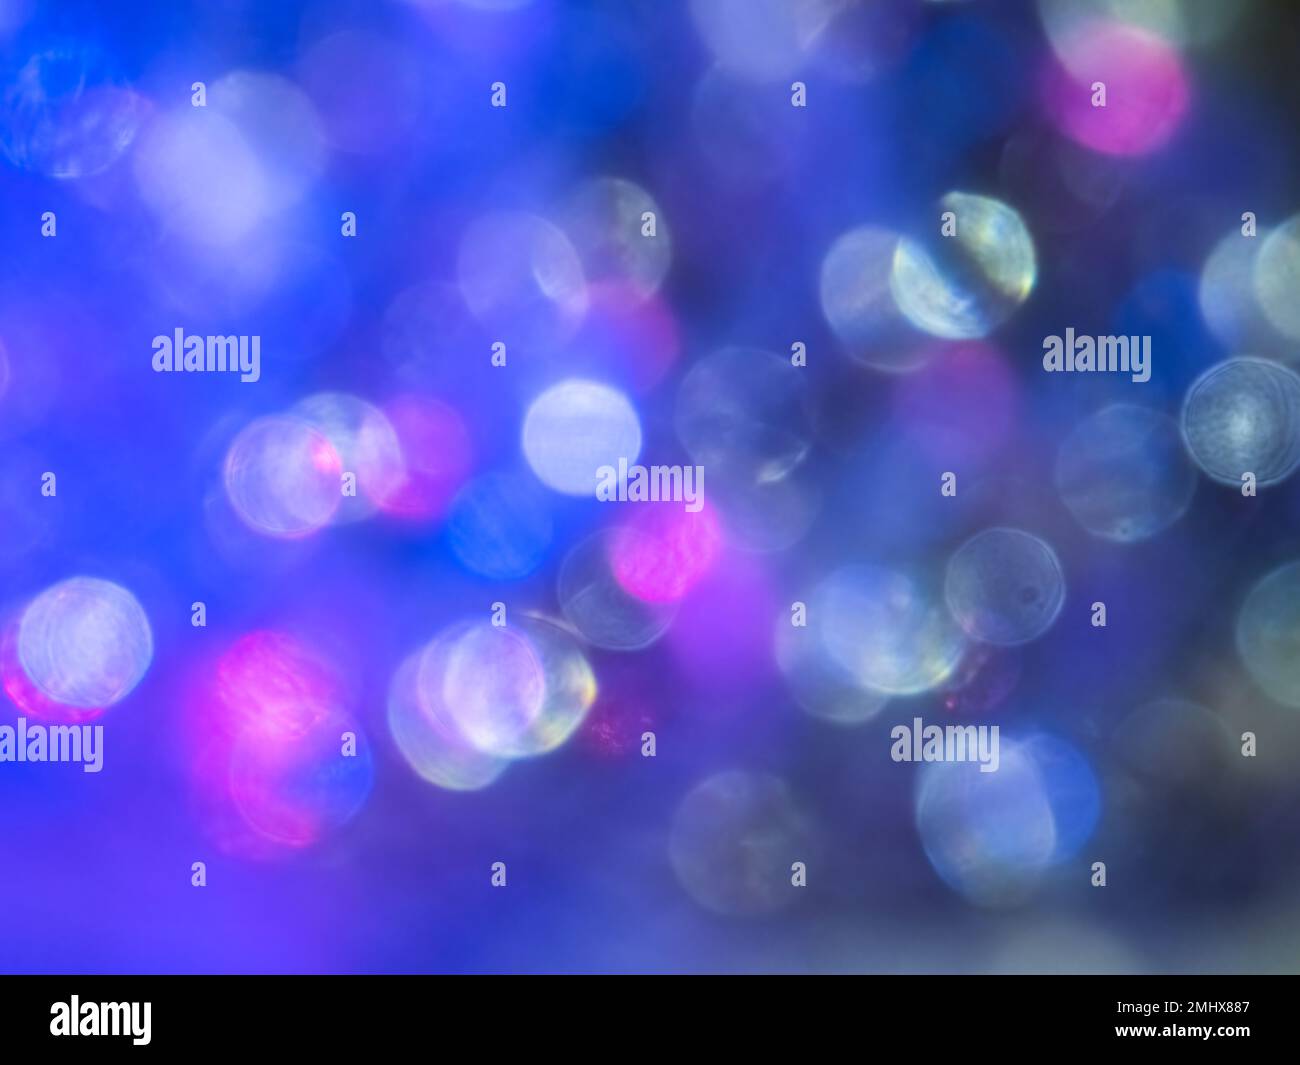 A background of abstract muted multicolored circles Stock Photo